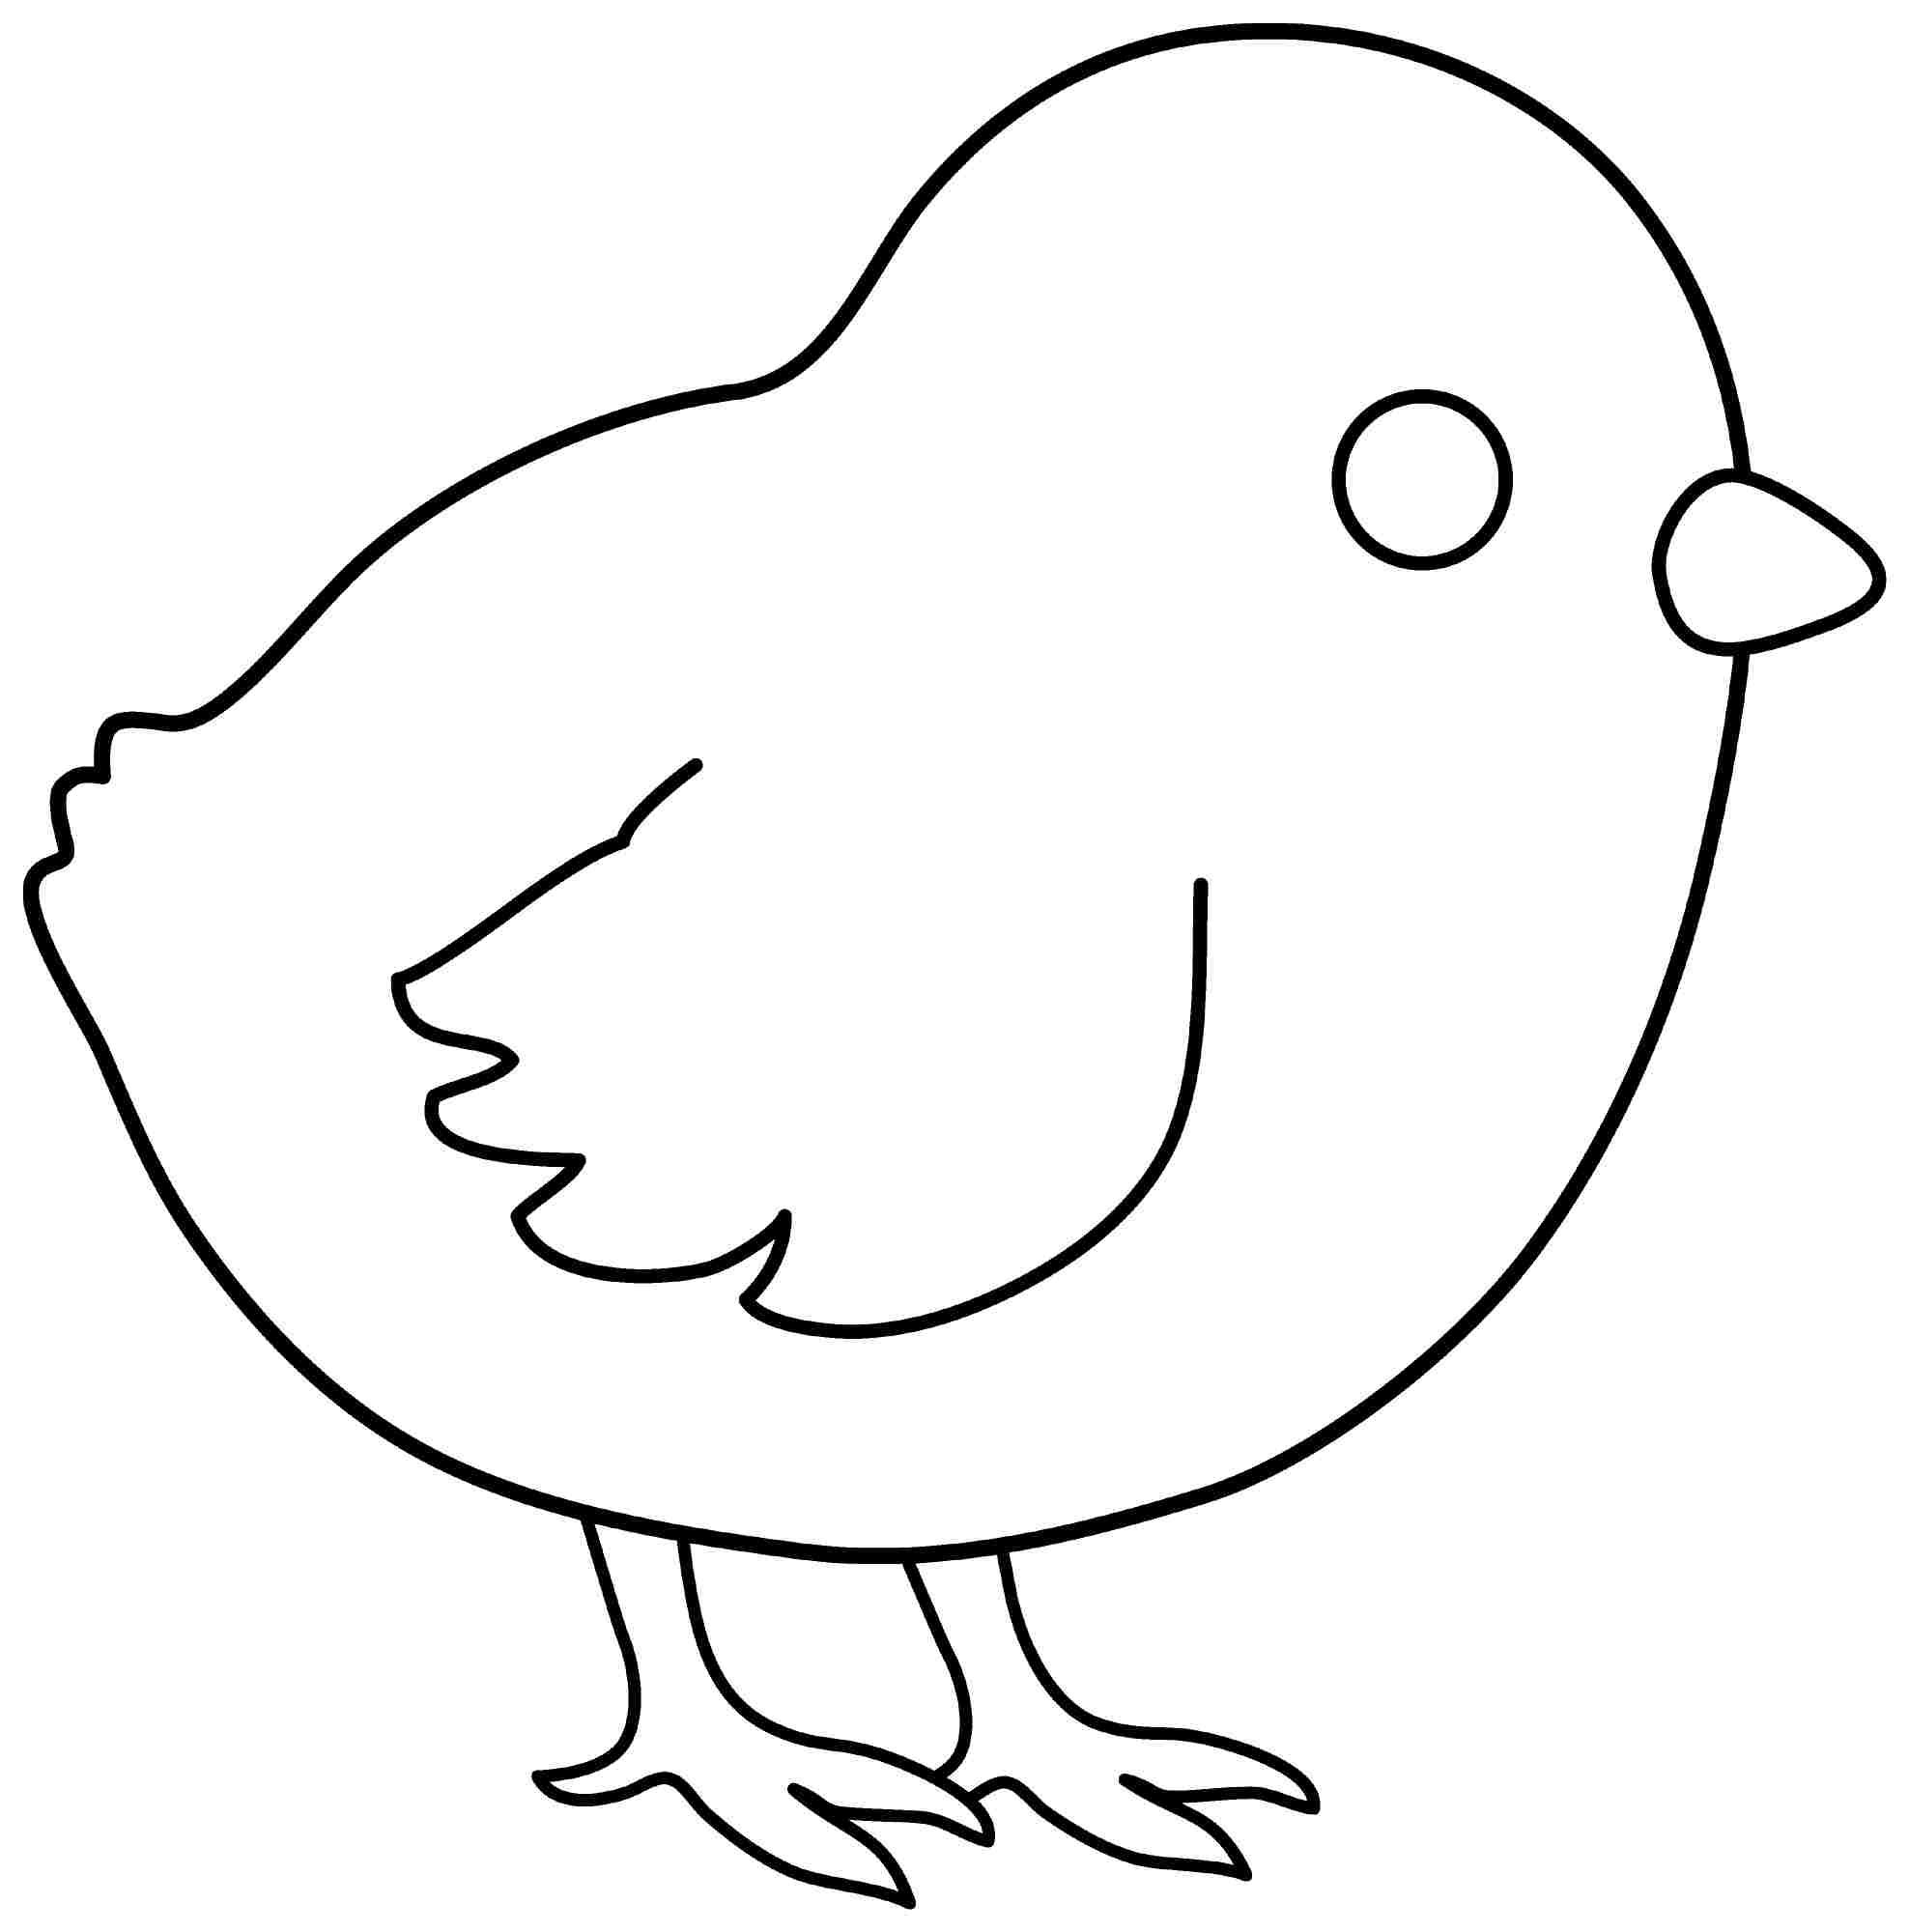 7 Best Images Of Printable Chick And Chicken Baby Chick Outline 